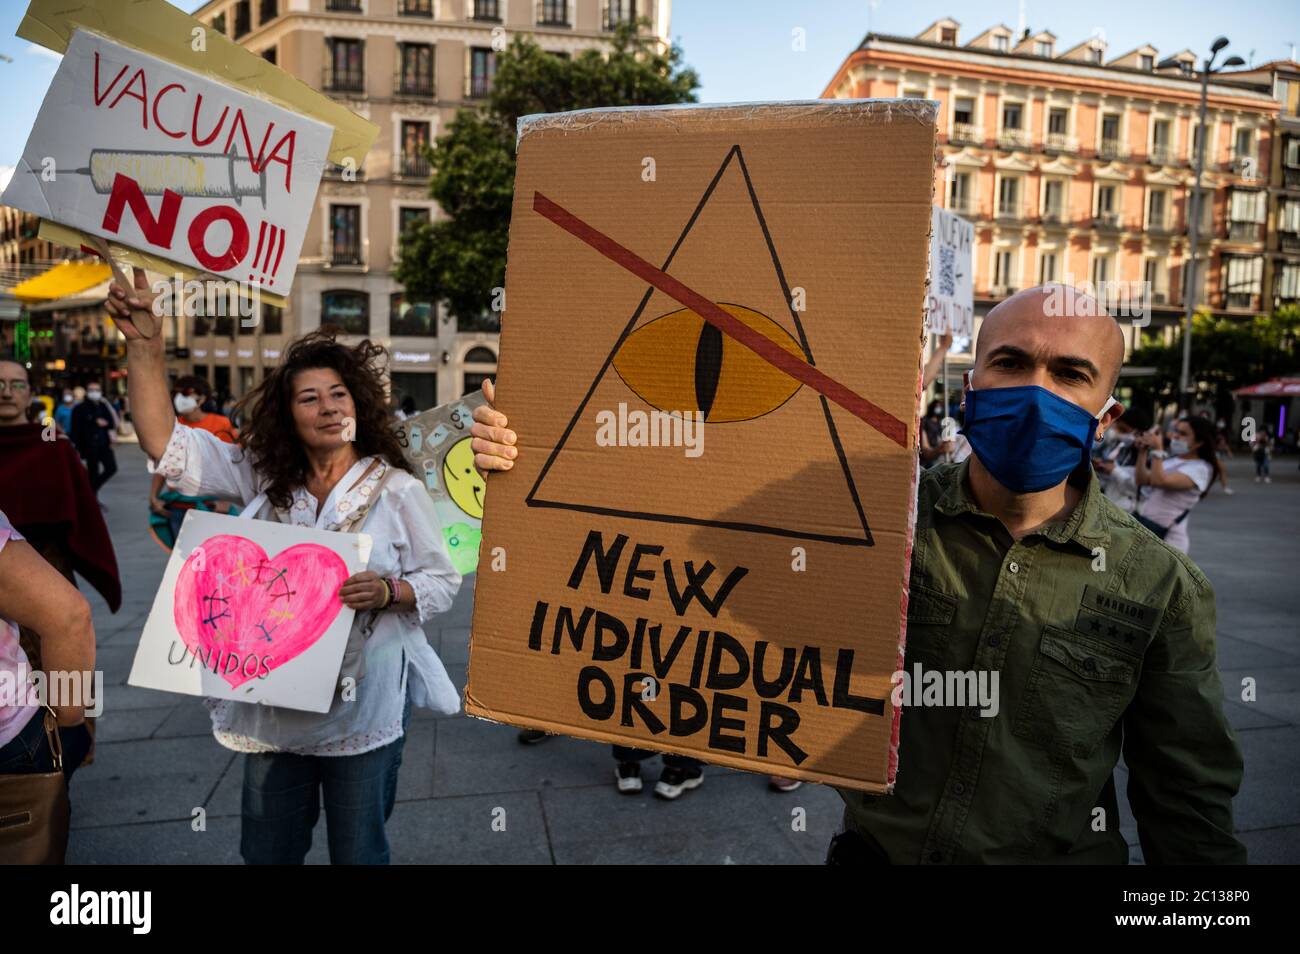 Madrid, Spain. 13th June, 2020. Madrid, Spain. June 13, 2020. People protesting with placards against new normality and New World Order conspiracy theory during the coronavirus (COVID-19) crisis. Credit: Marcos del Mazo/Alamy Live News Stock Photo